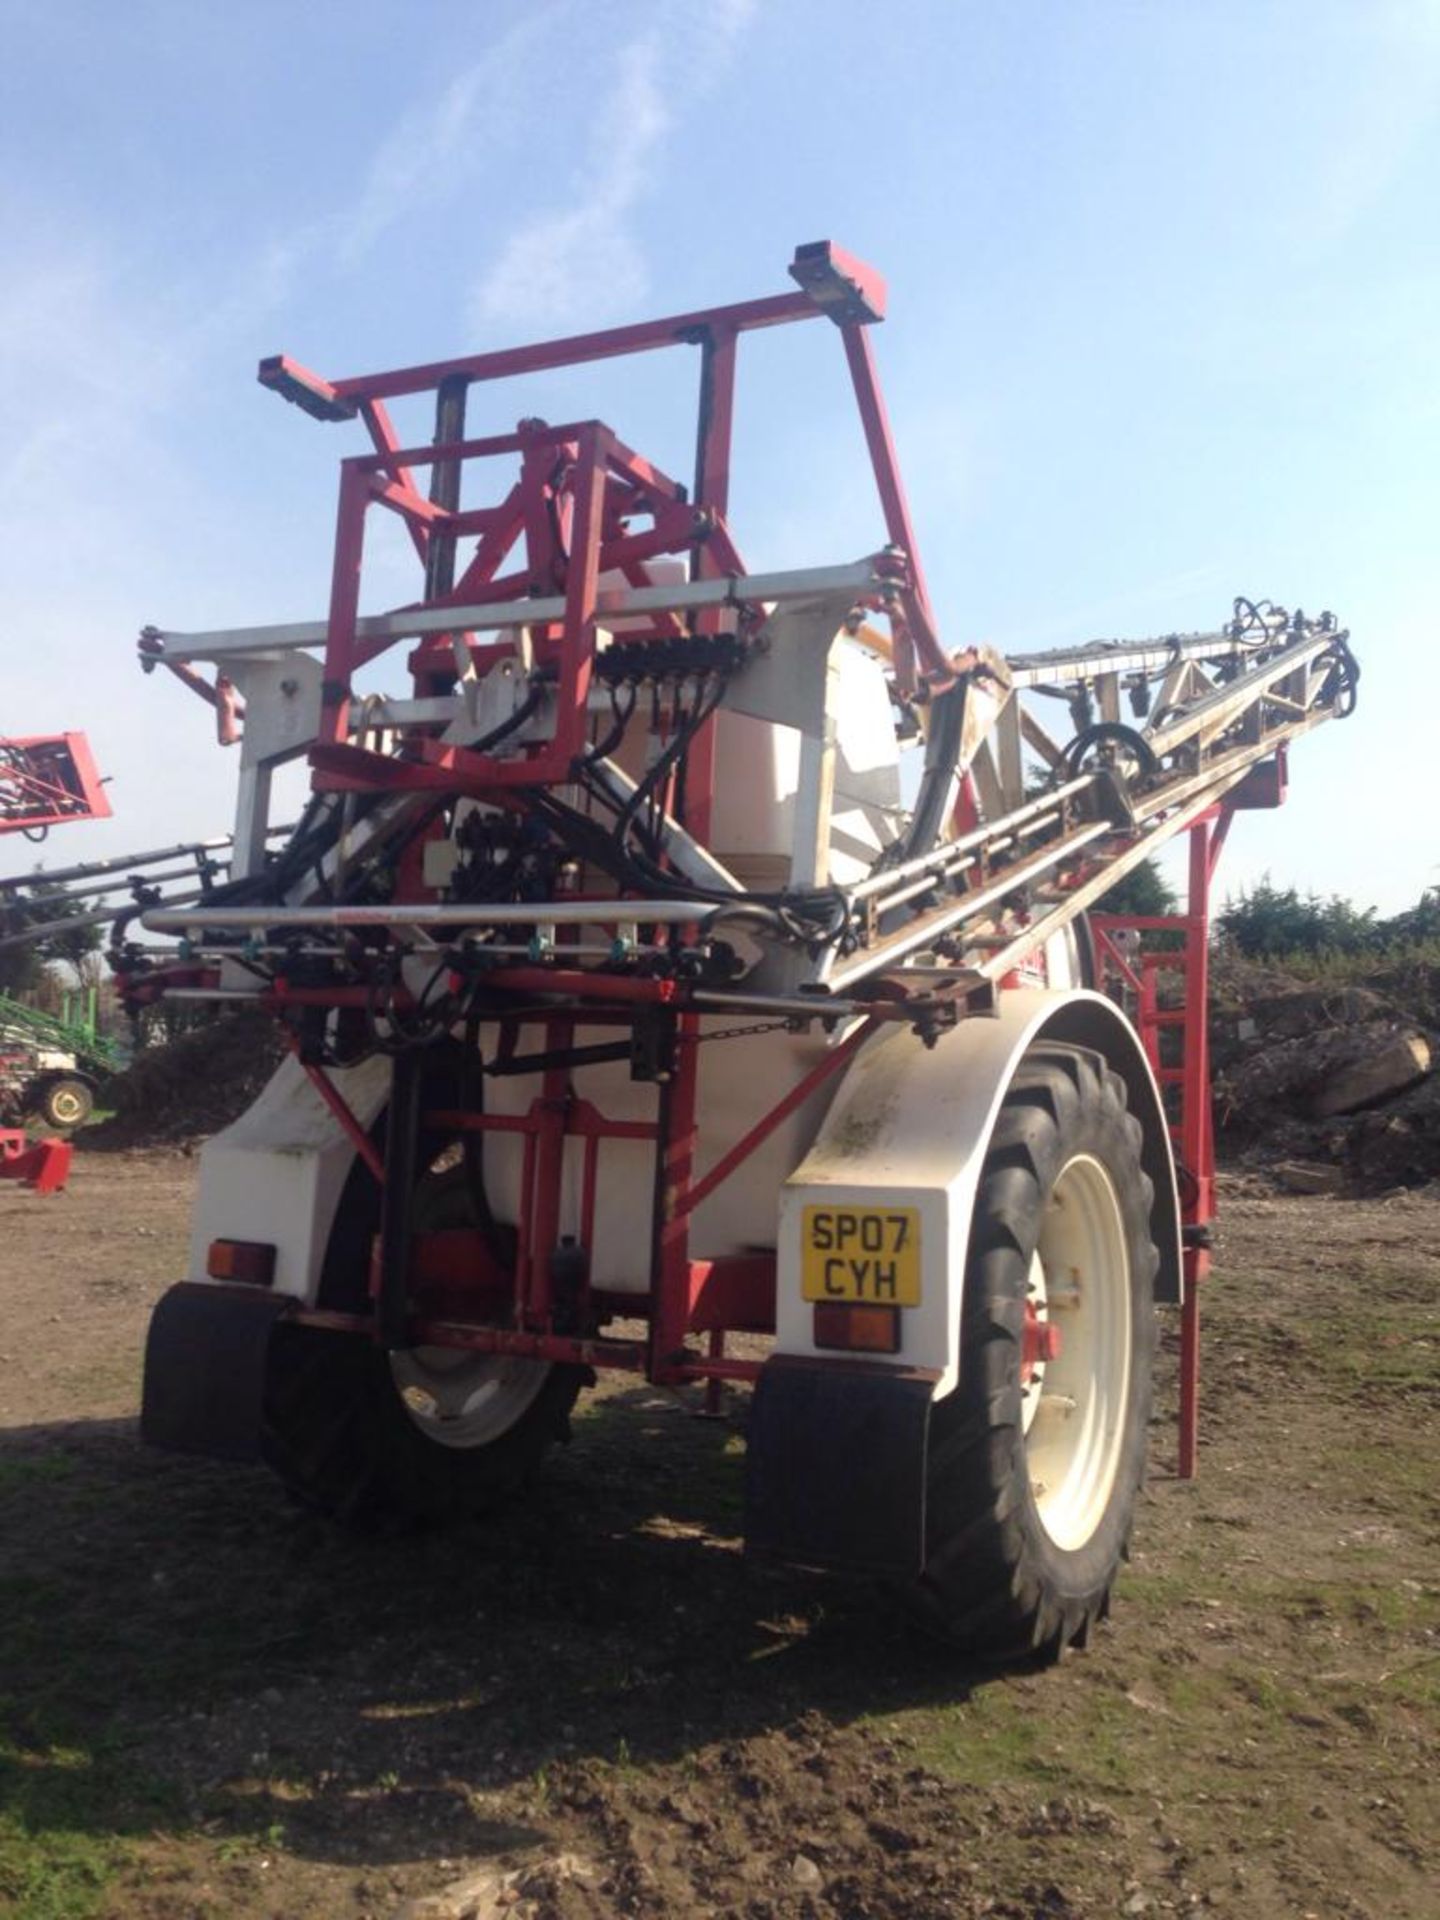 2008 Landquip 3500 Trailed Sprayer, 24m, 3500L Tank, 300L Clean Water, Tracking Steering, 6 Section - Image 3 of 6